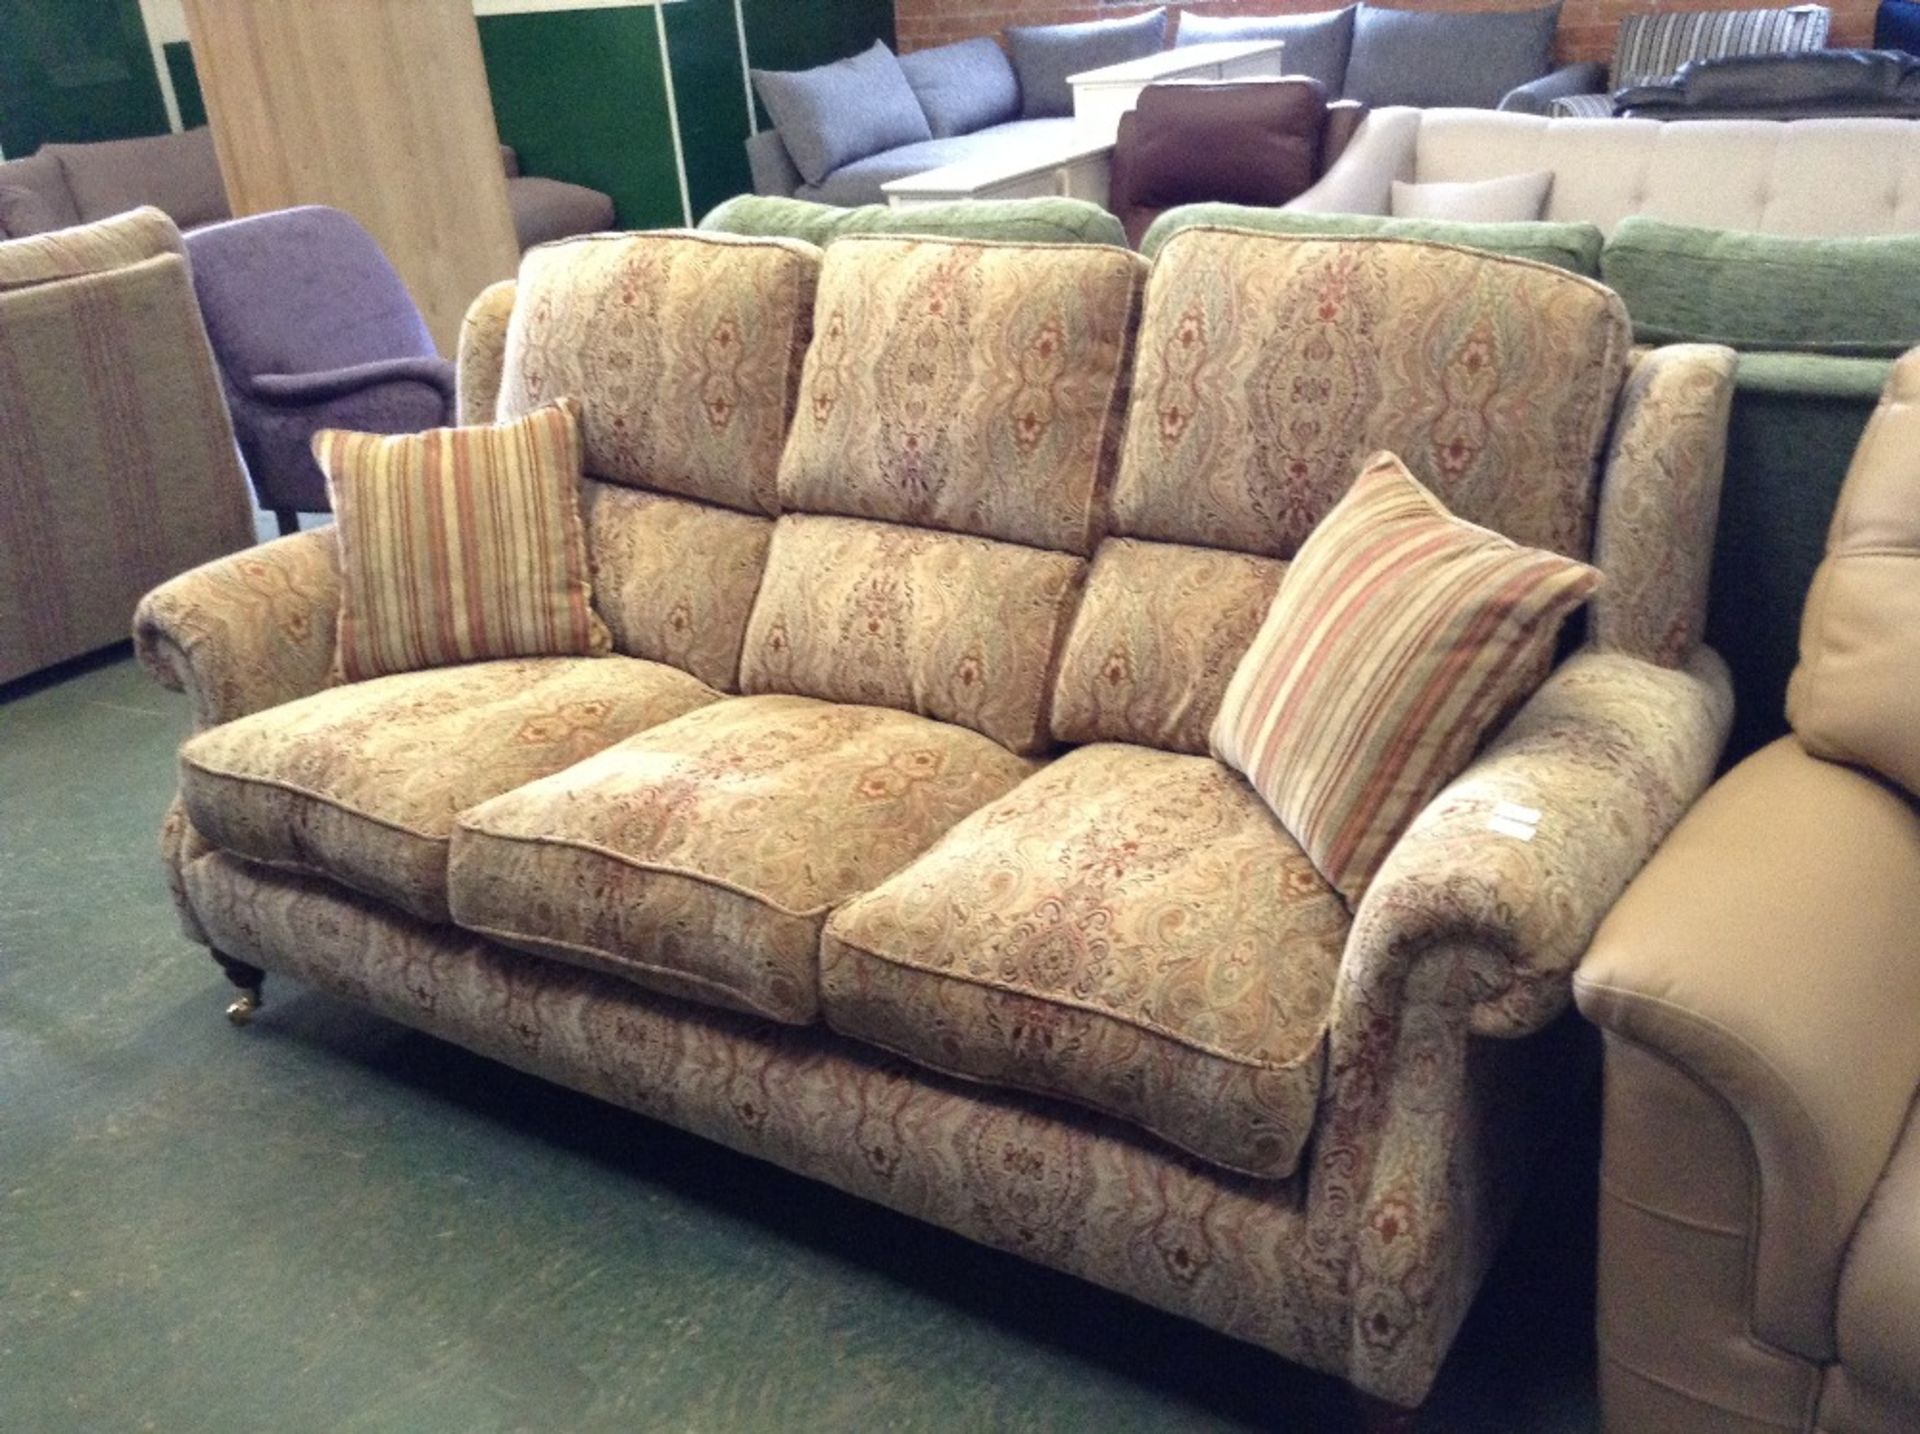 RED AND GOLD FLORAL PATTERNED 3 SEATER SOFA (TR000